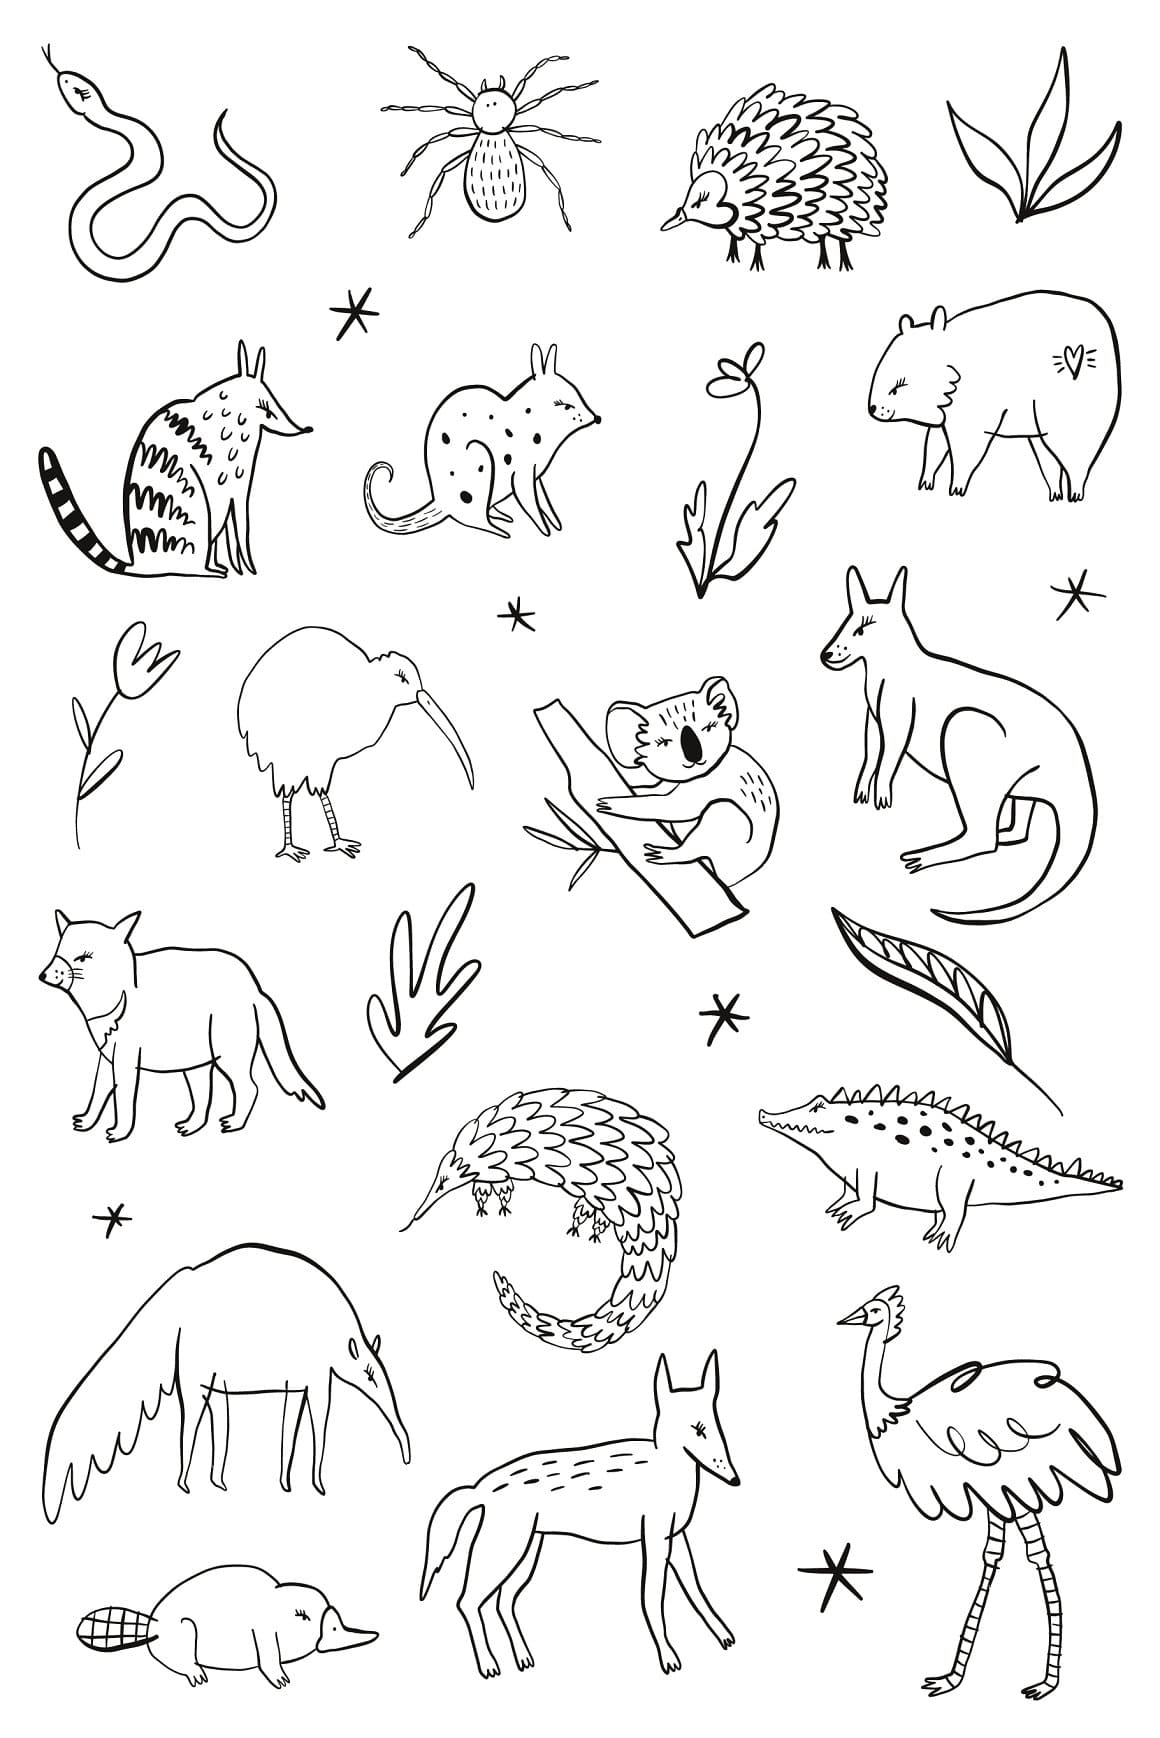 Australian Animals Black and White preview image.